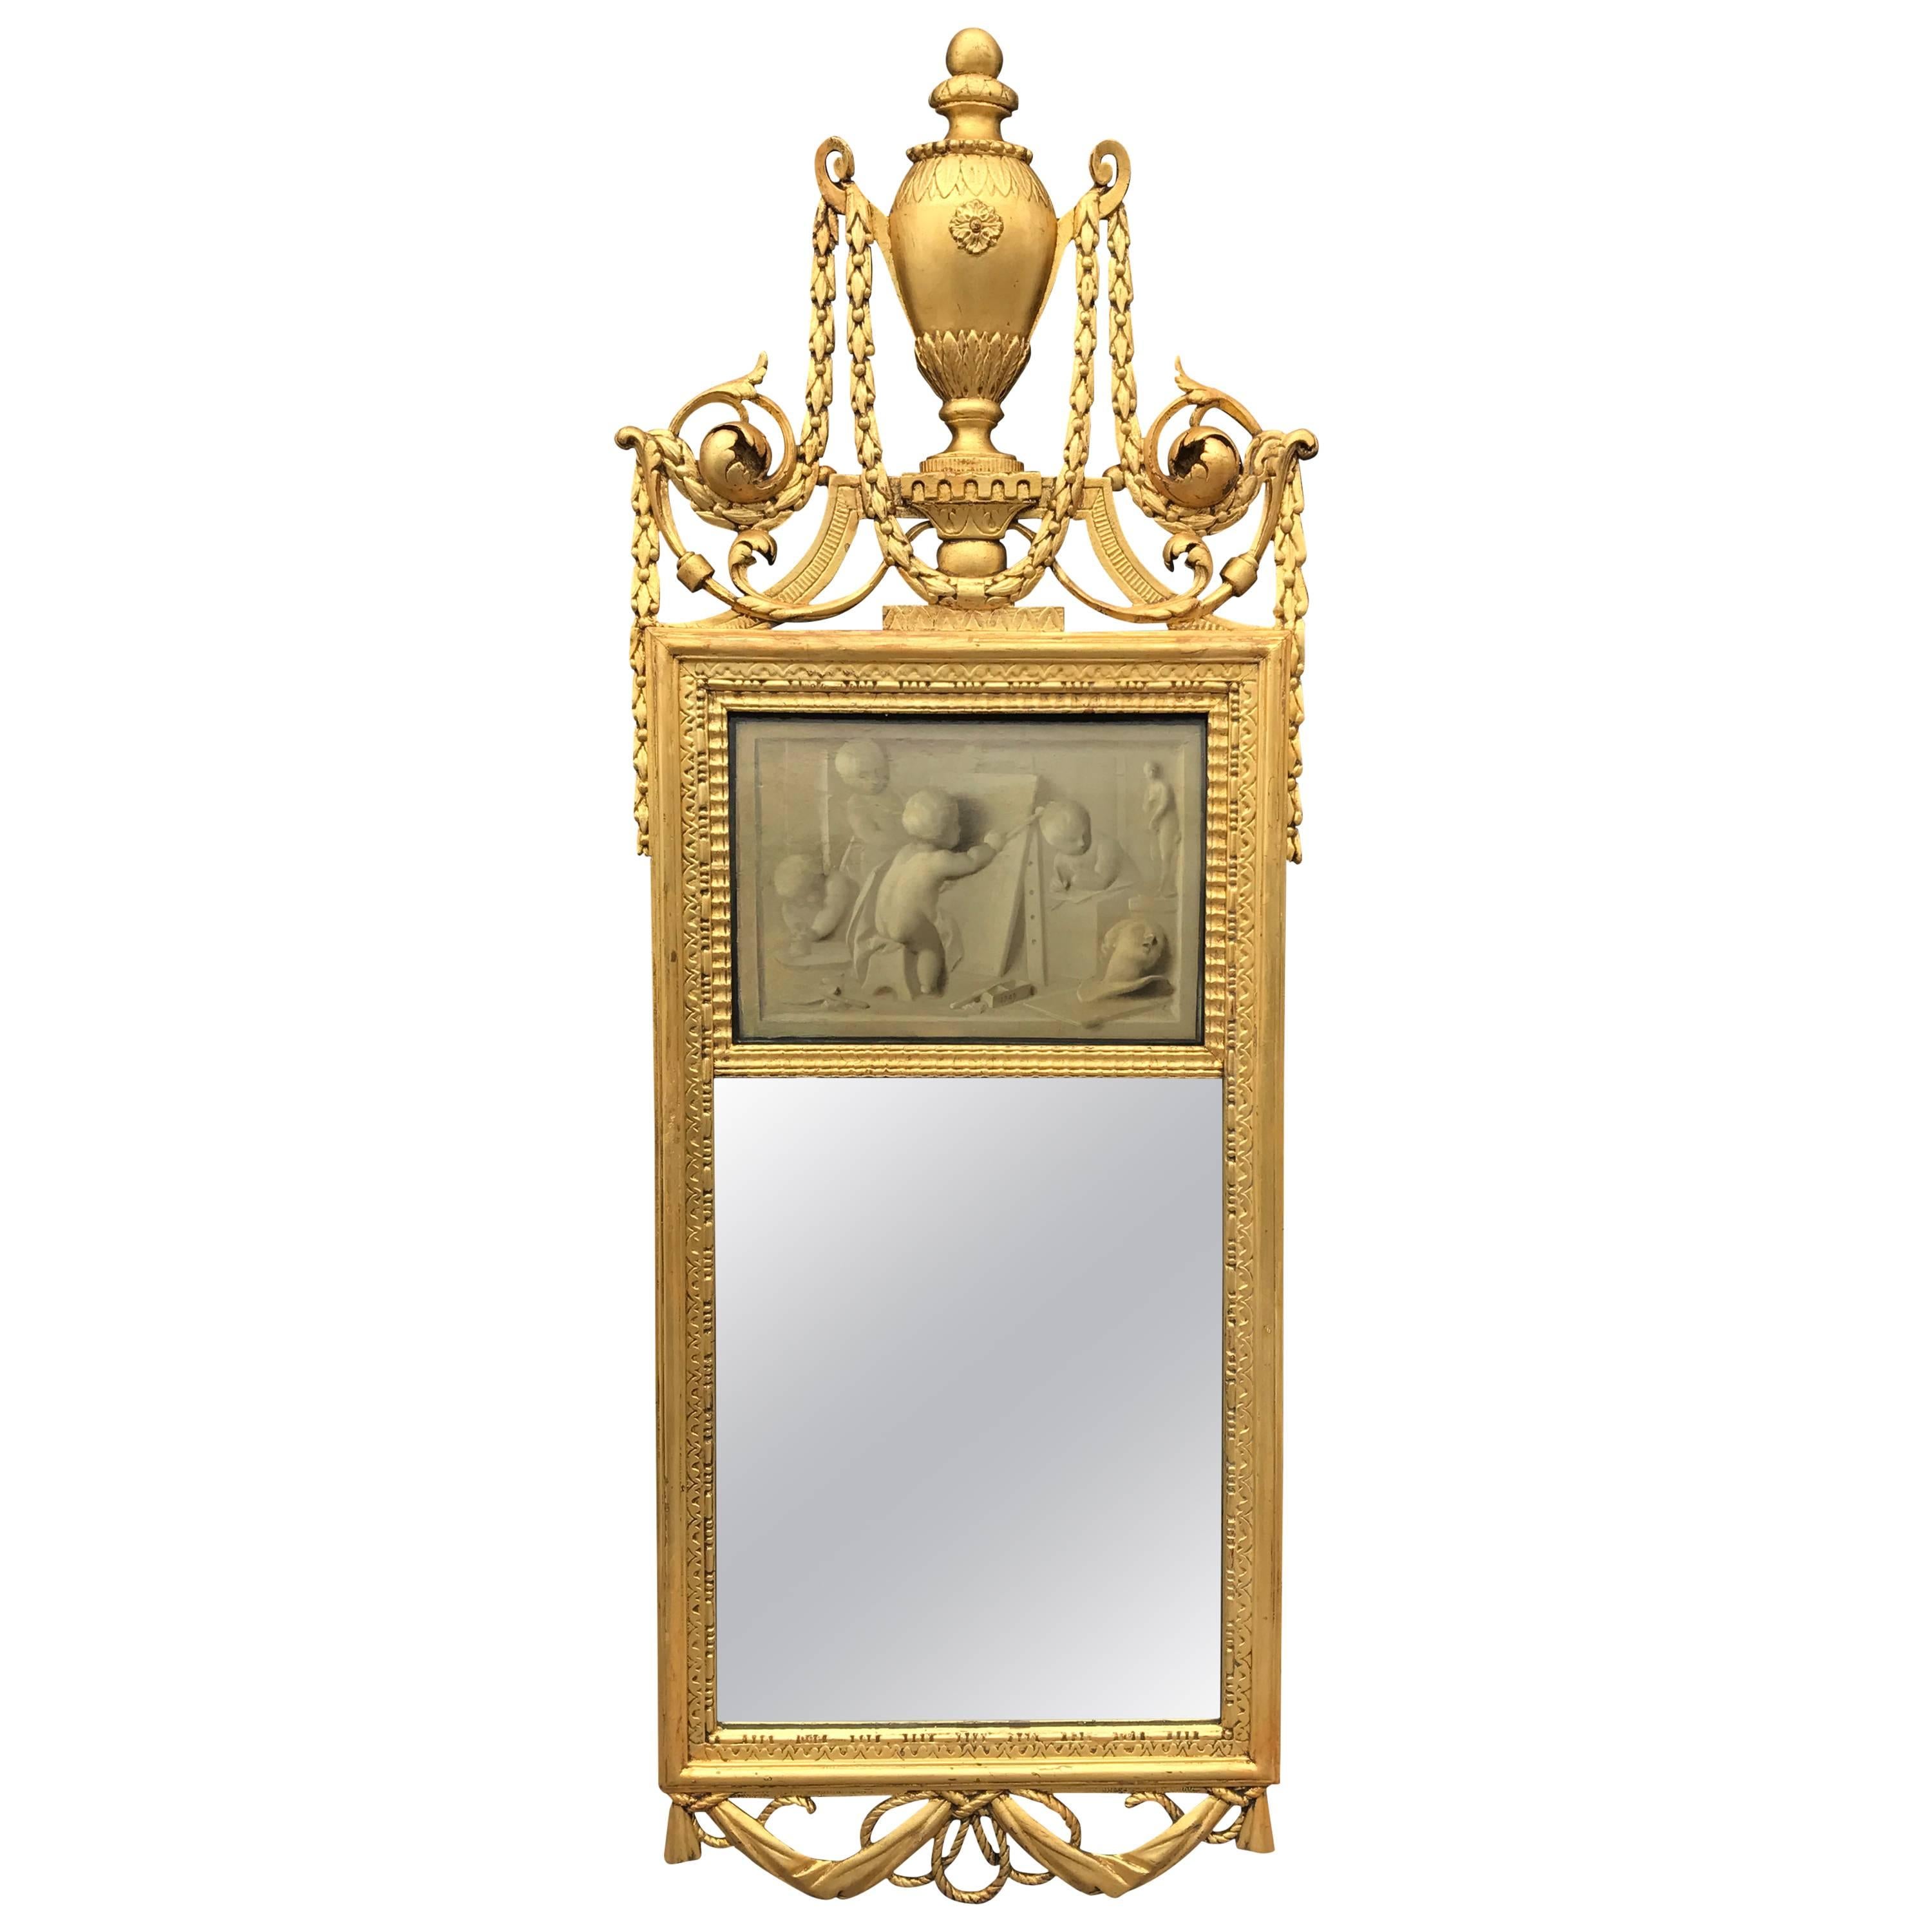 18th Century Neoclassical Mirror with Signed Grisaille by Jacob de Wit, 1749 For Sale